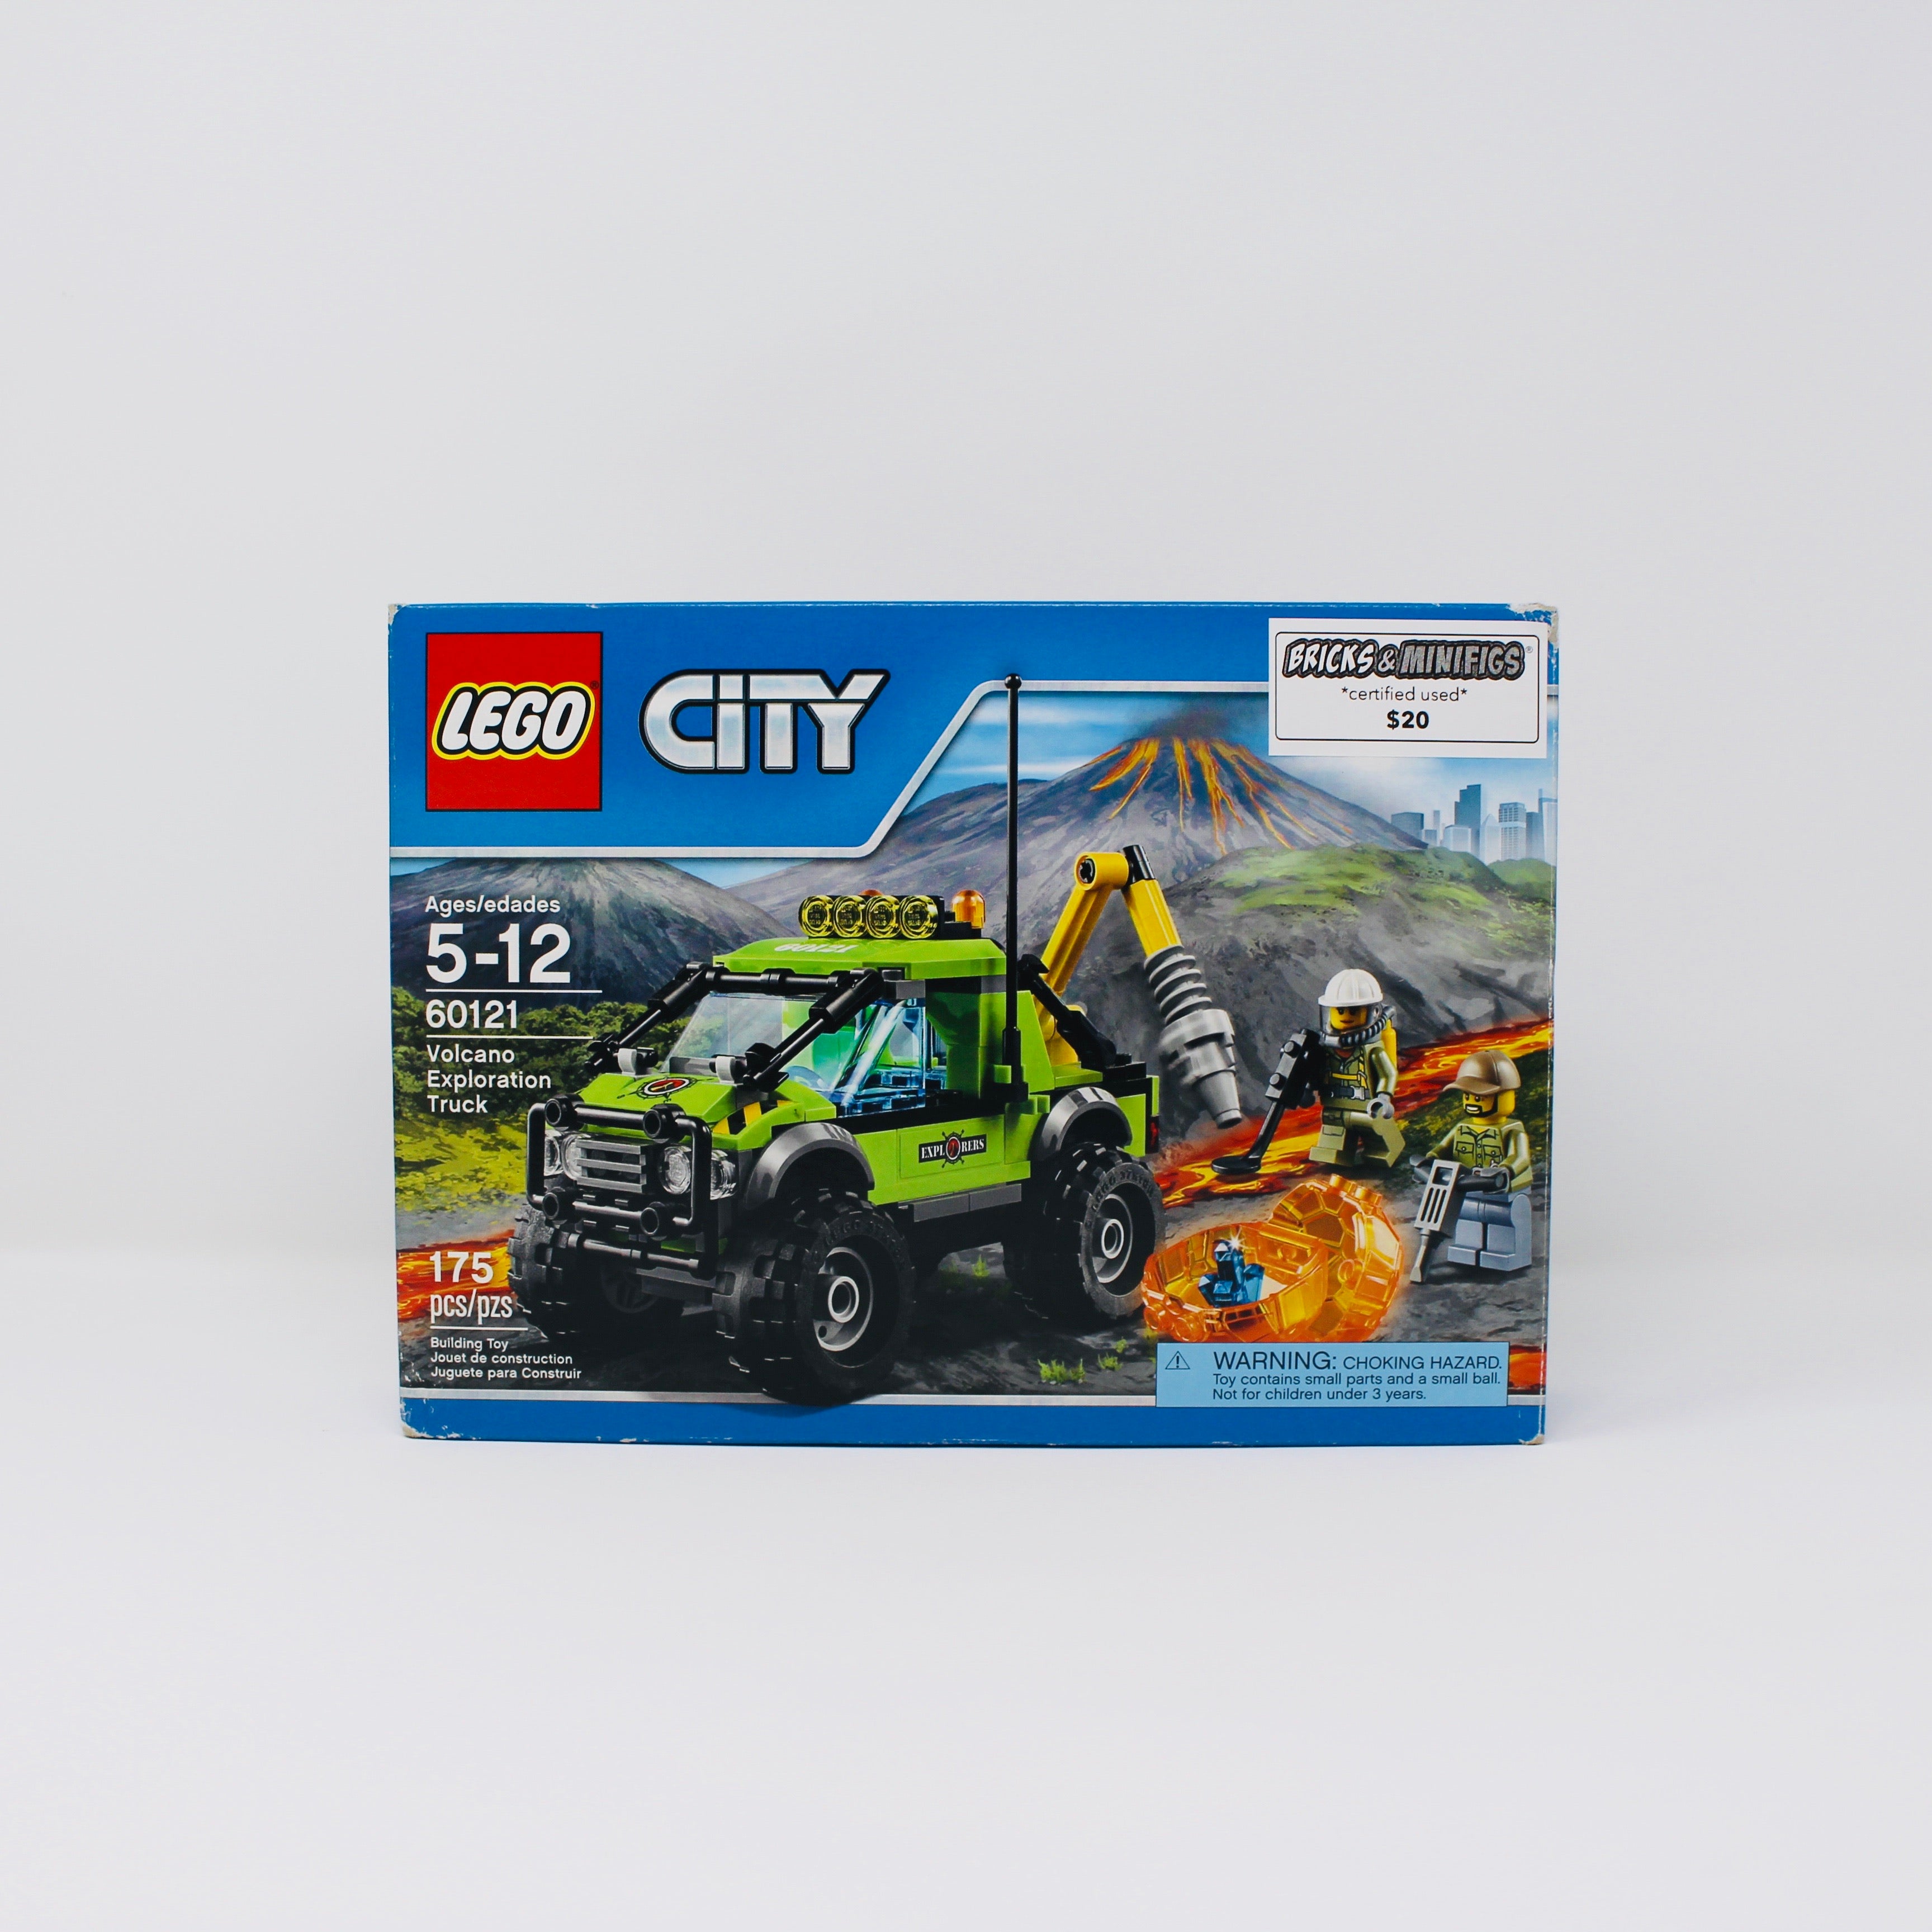 Certified Used Set 60121 City Volcano Exploration Truck